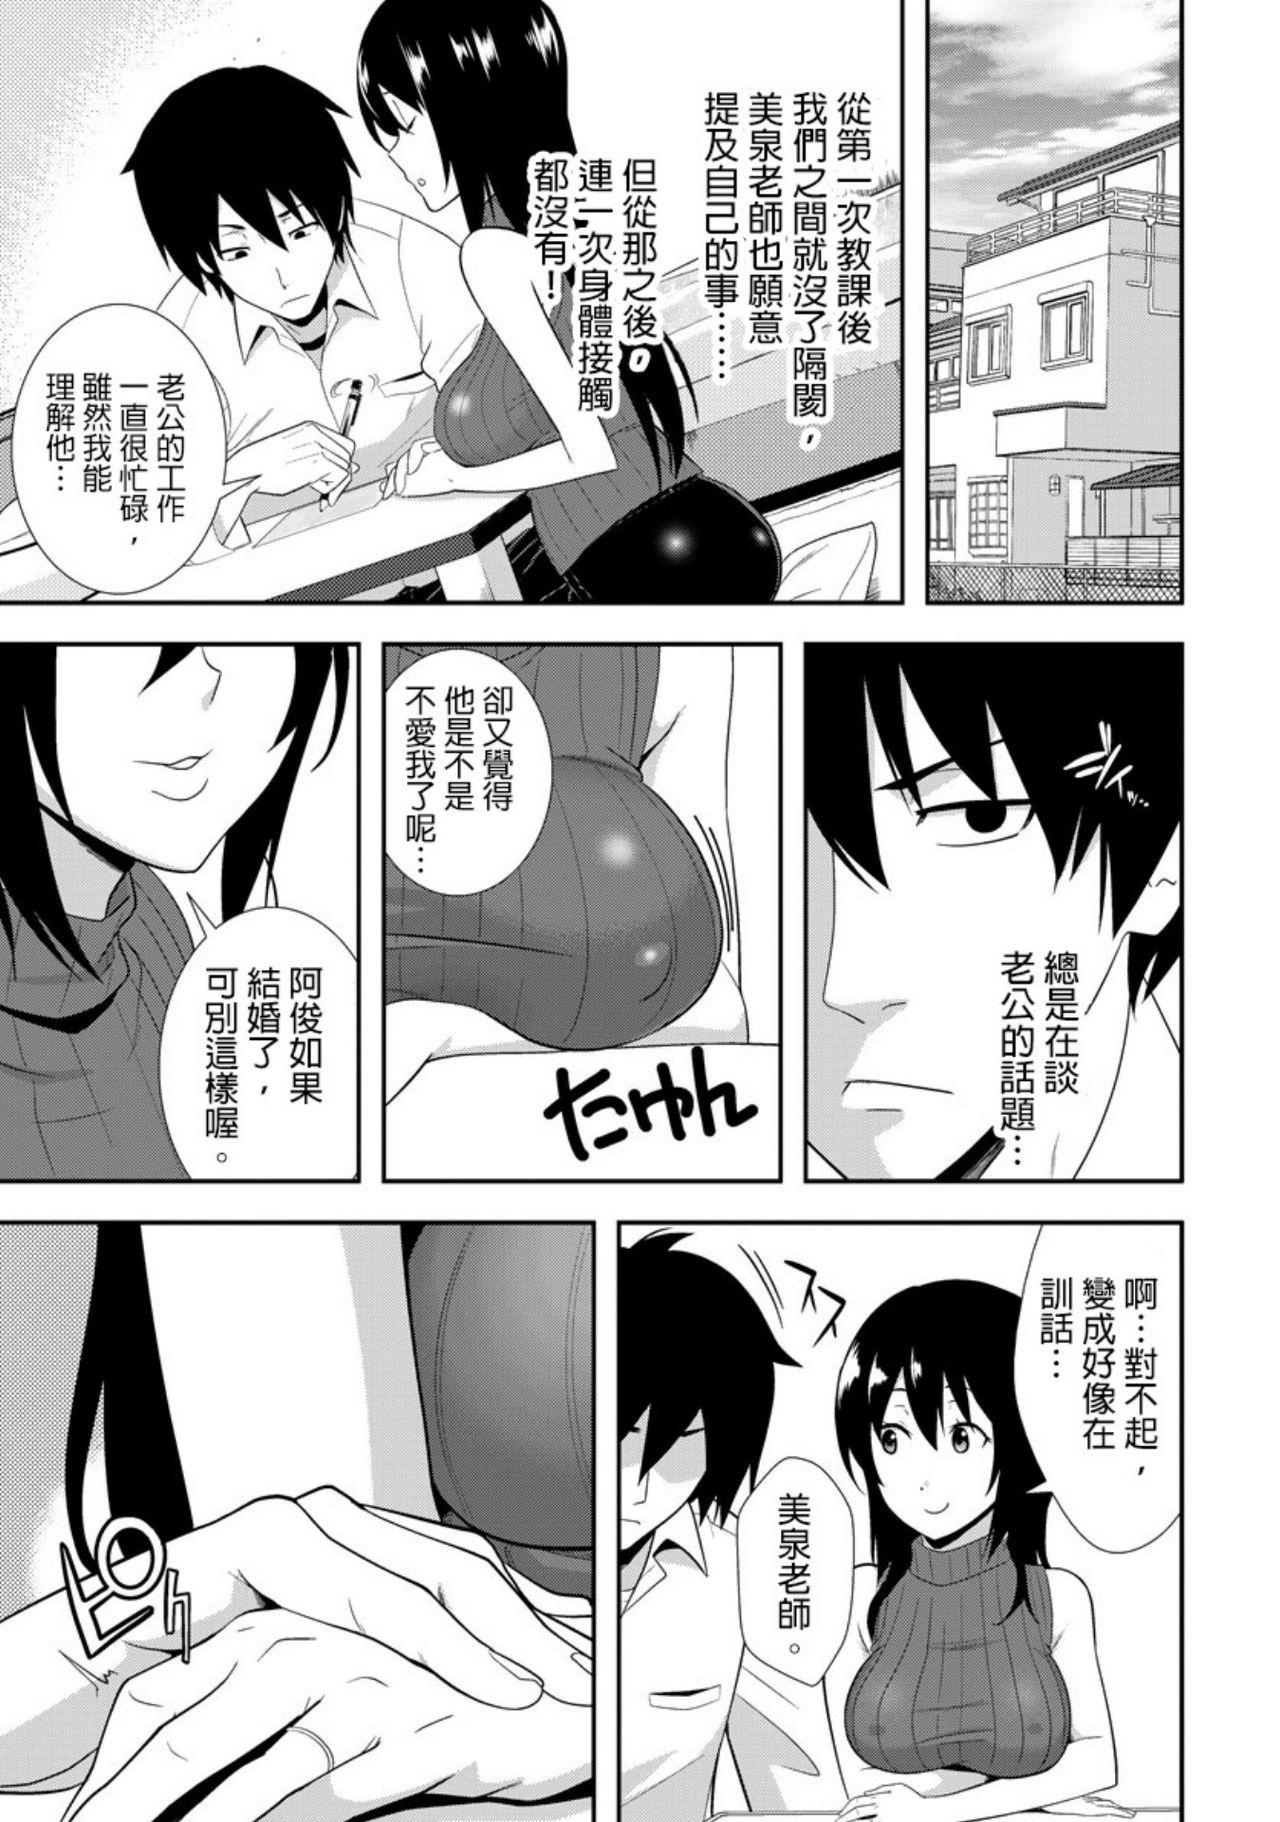 Massages 教え子に襲ワレル人妻は抵抗できなくて Ch.1 Swinger - Page 6